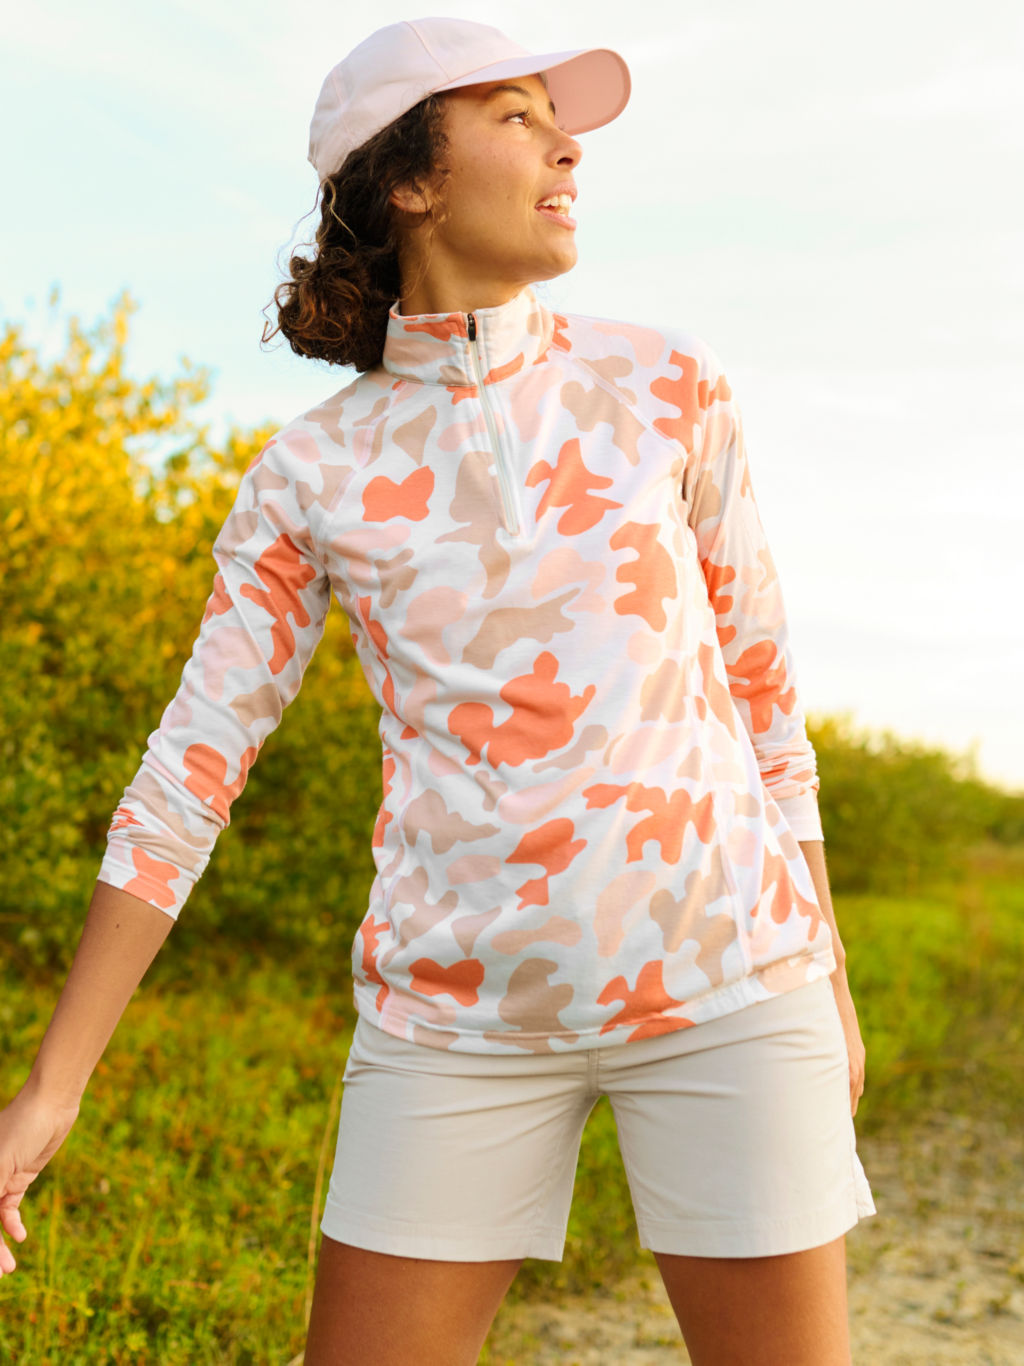 A hiker wearing a colorful camo drirelease shirt looks back over her shoulder on a bright day.